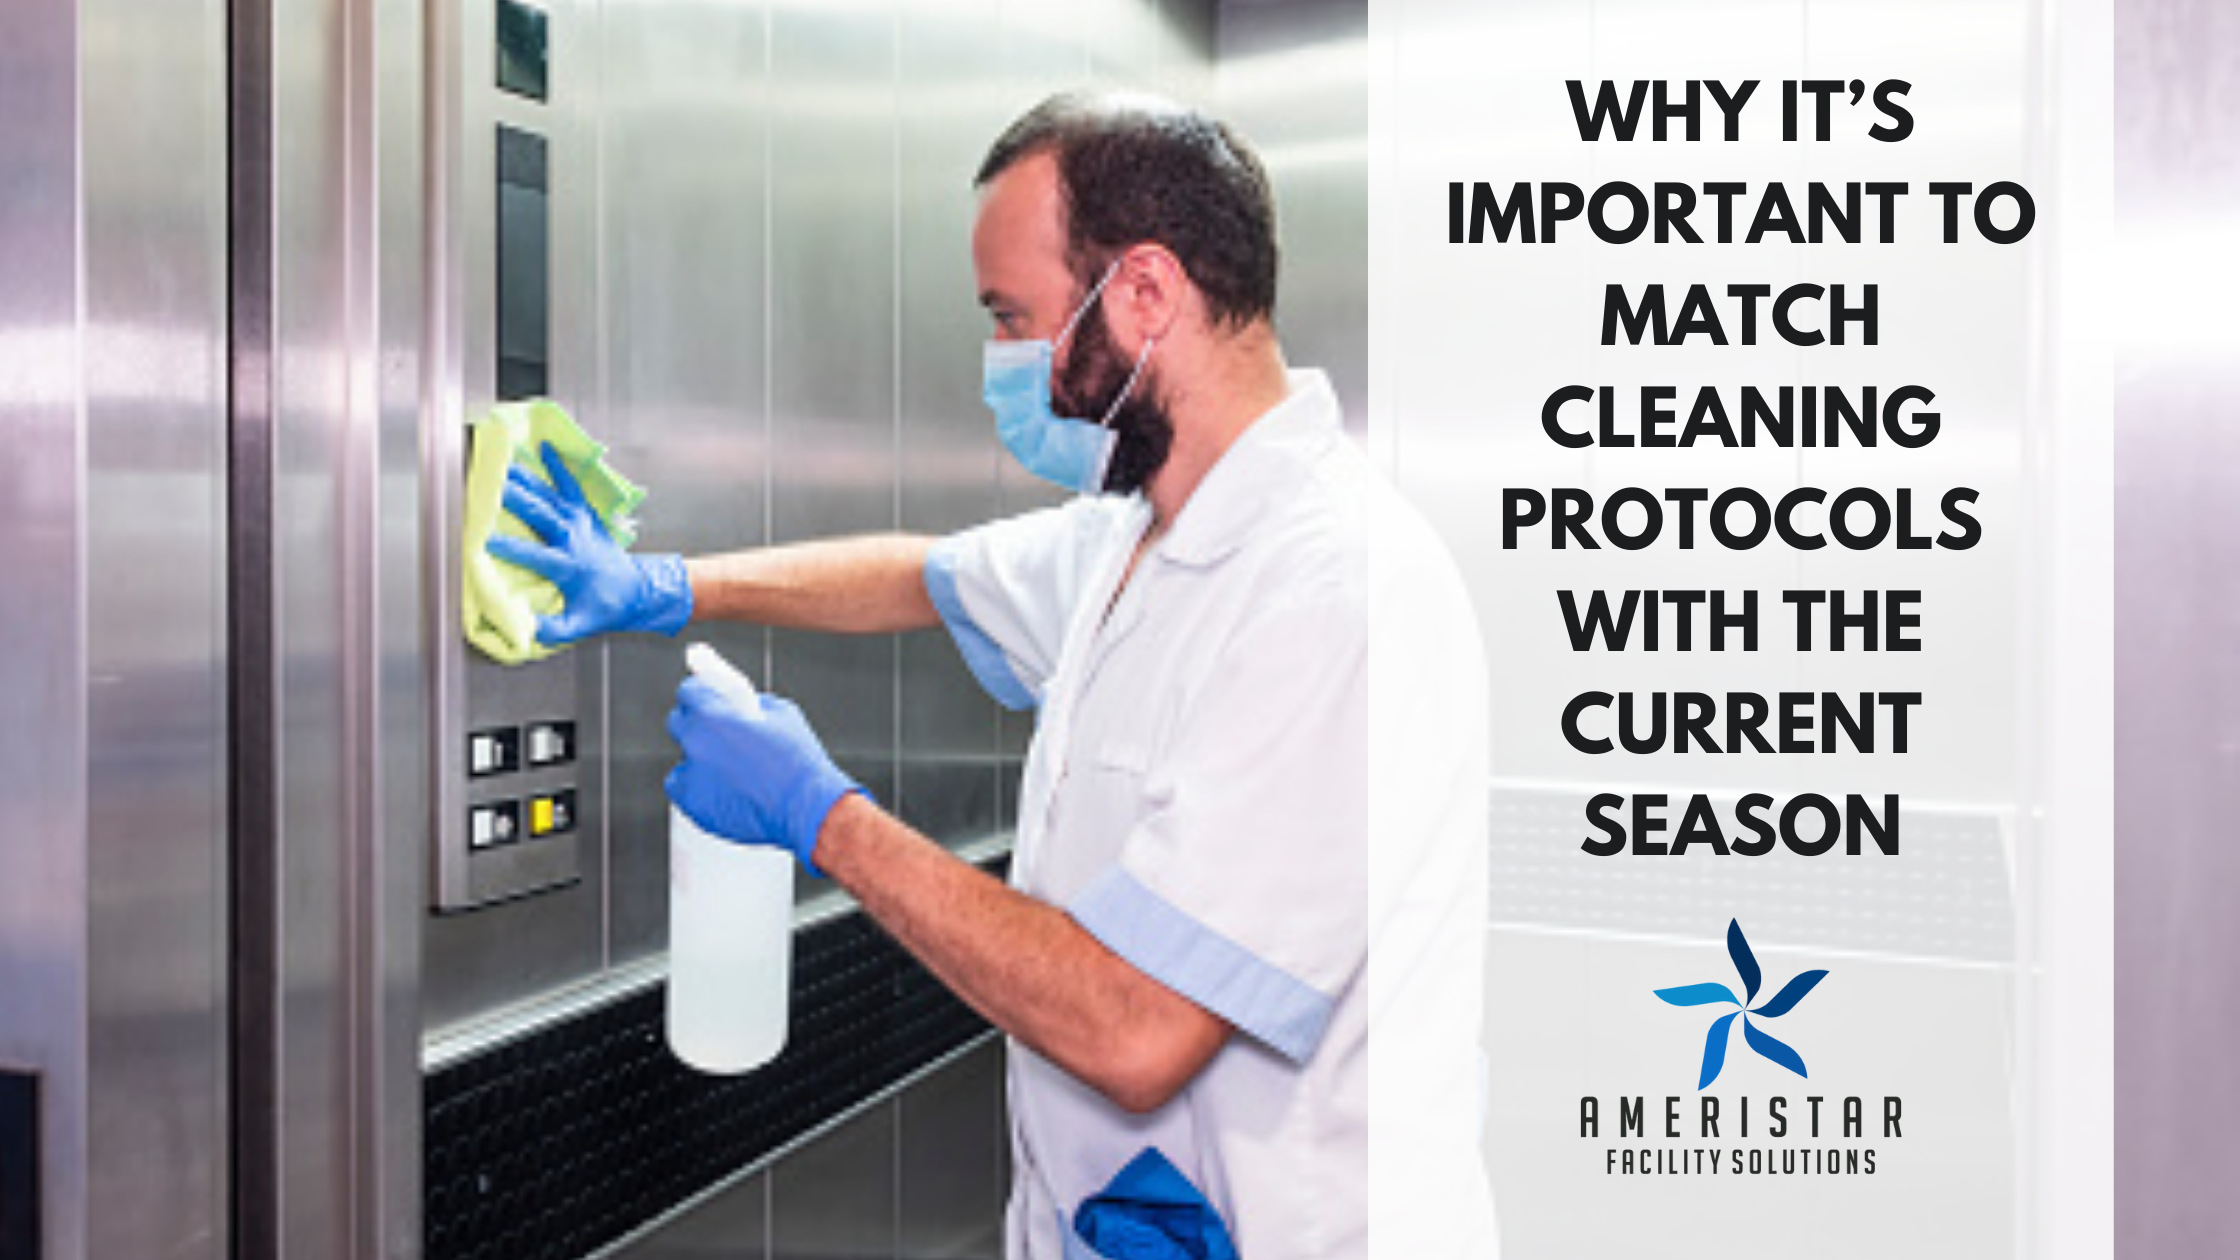 Why It’s Important to Match Cleaning Protocols With the Current Season